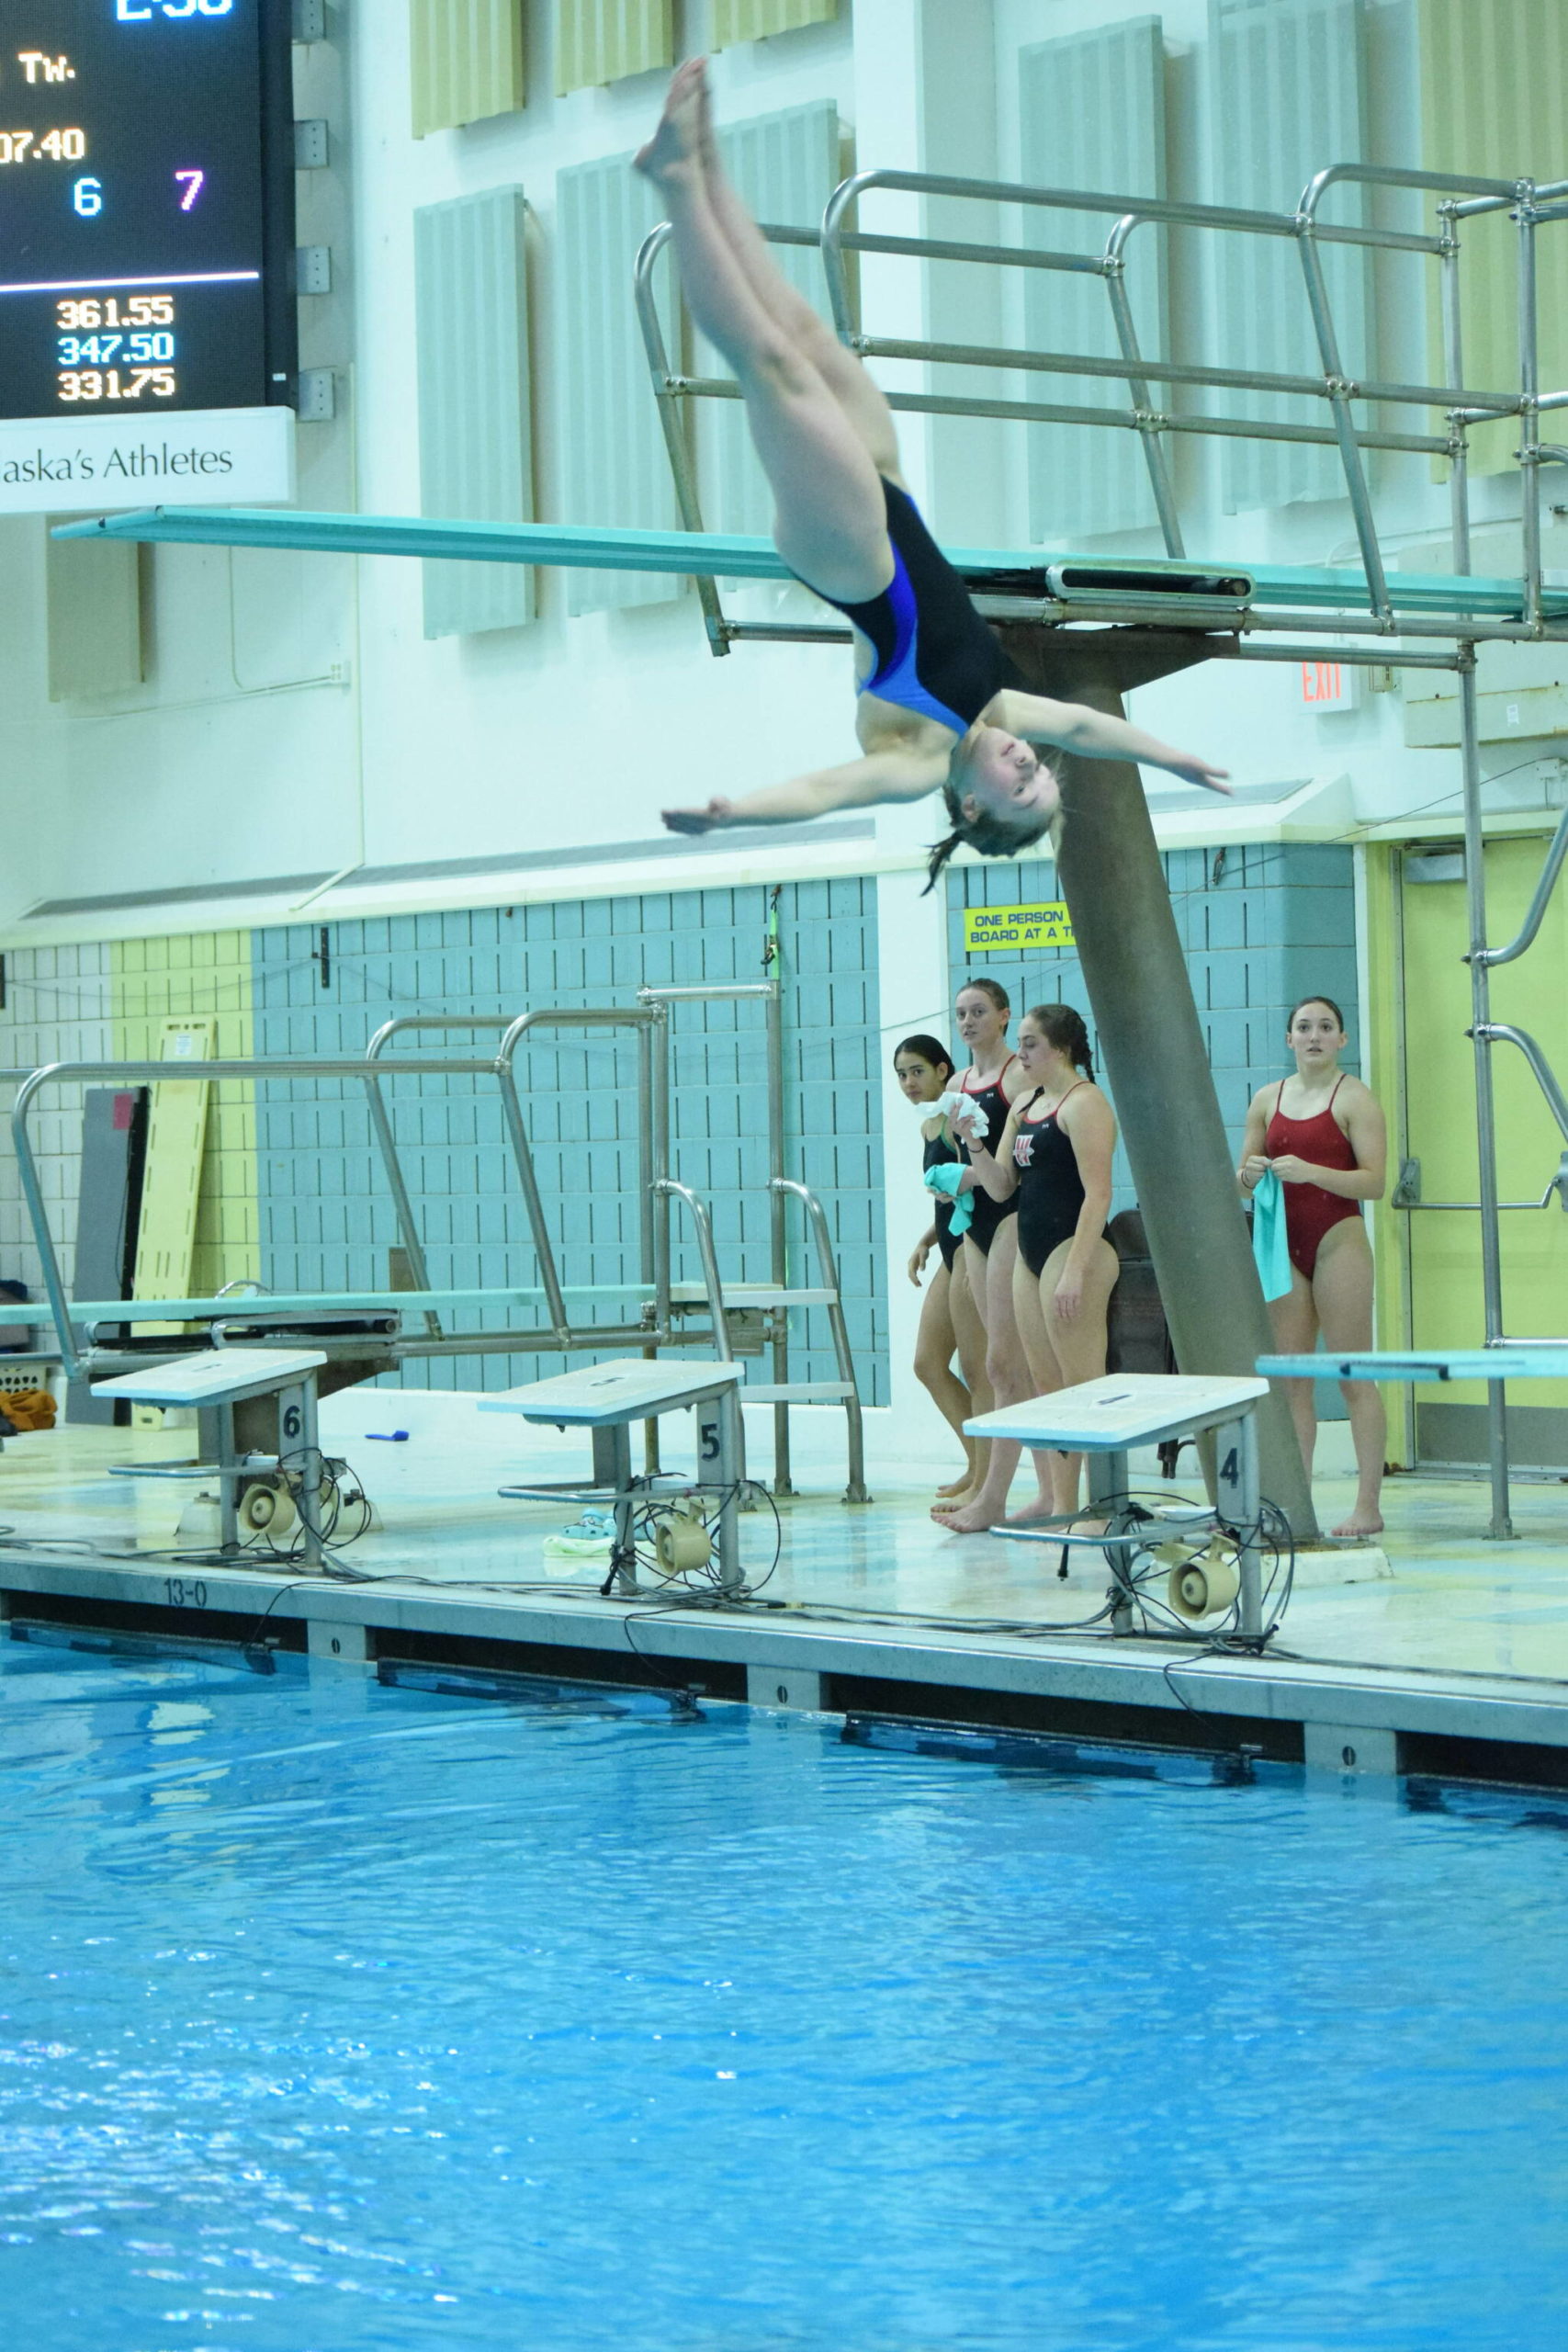 Soldotna’s Abriella Werner competes in the state diving finals at Bartlett High School in Anchorage on Saturday, Nov. 6, 2021. (Camille Botello/Peninsula Clarion)